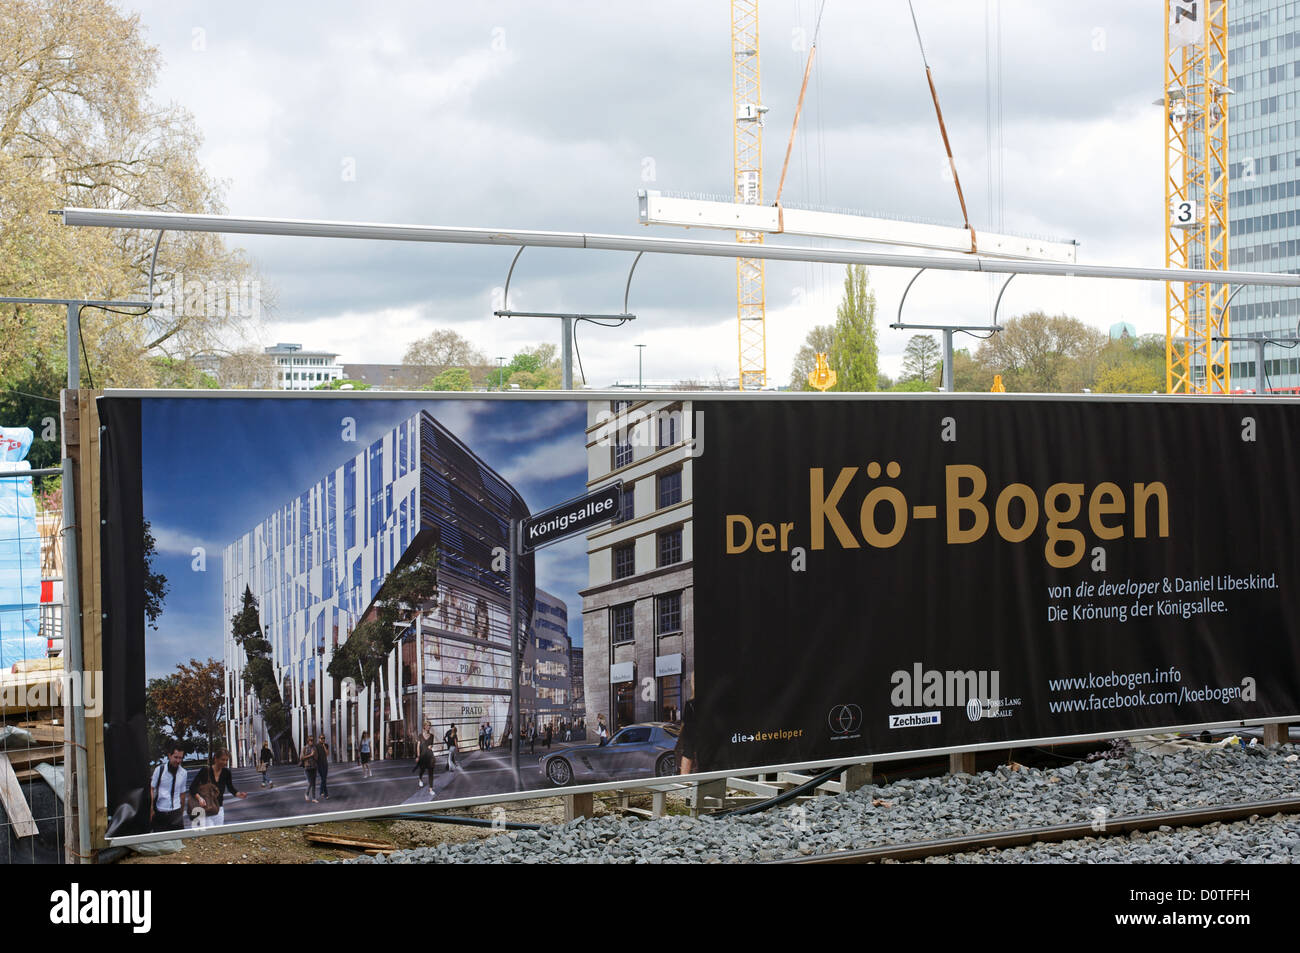 Der Ko-Bogen development of a shopping centre and offices Dusseldorf Germany Stock Photo